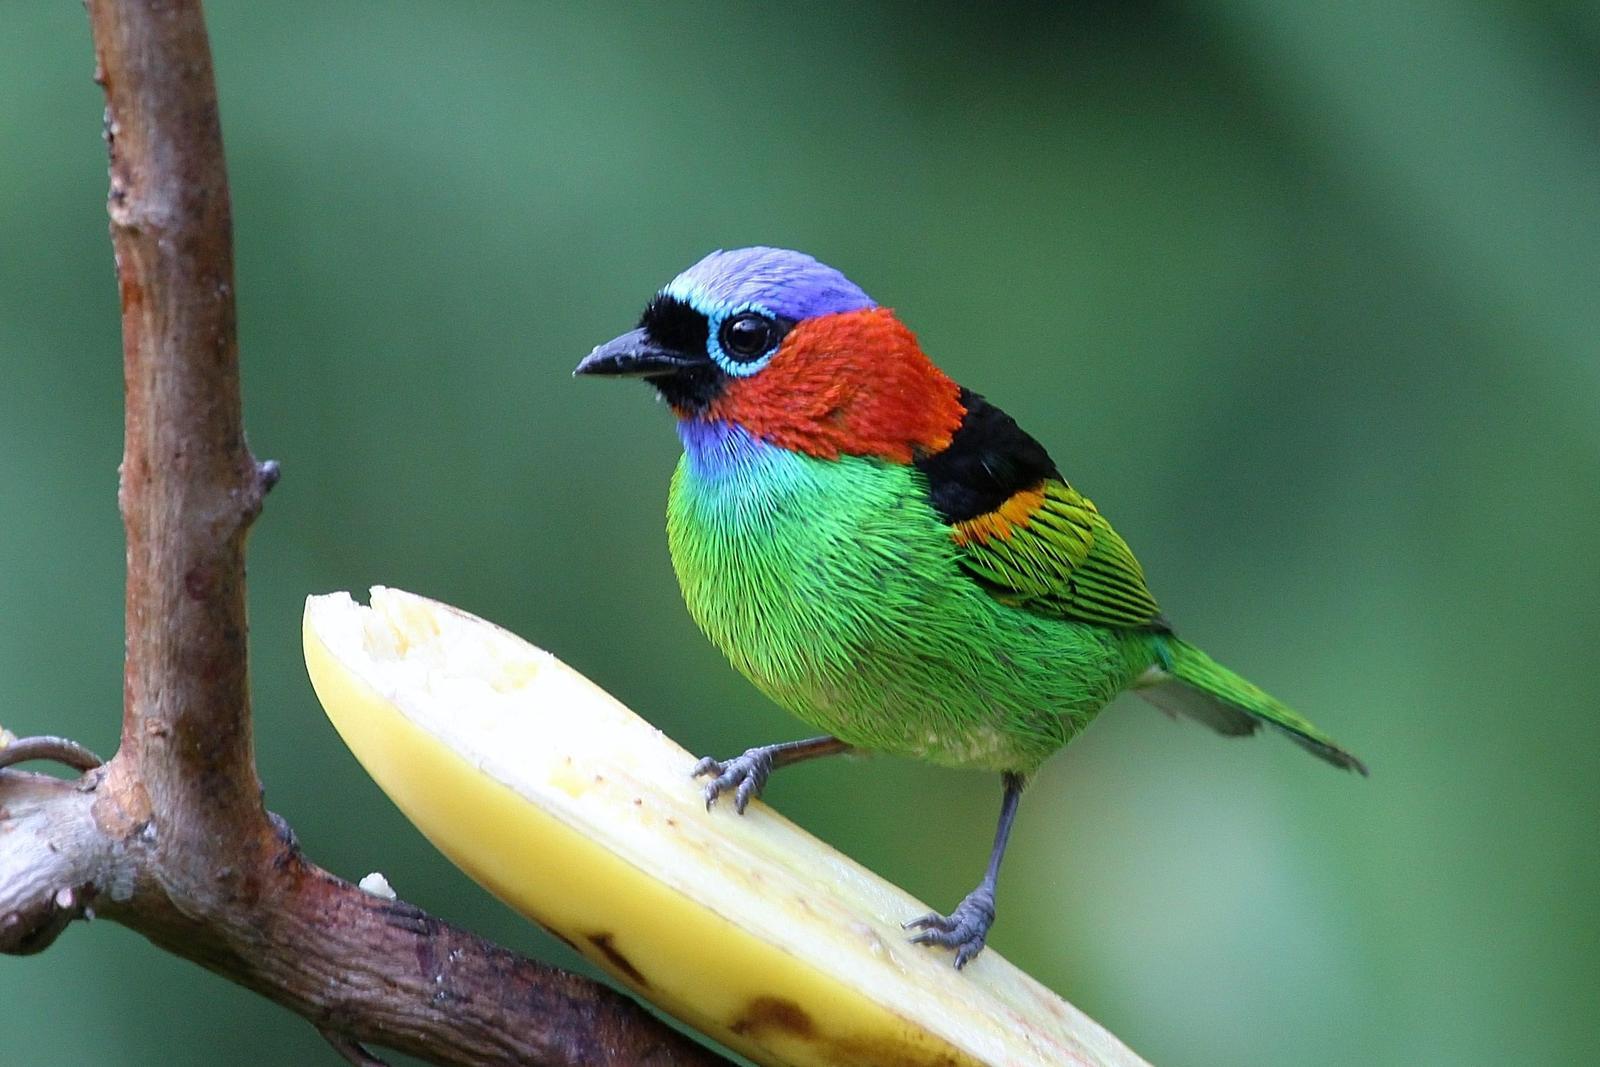 Red-necked Tanager Photo by Matthew McCluskey